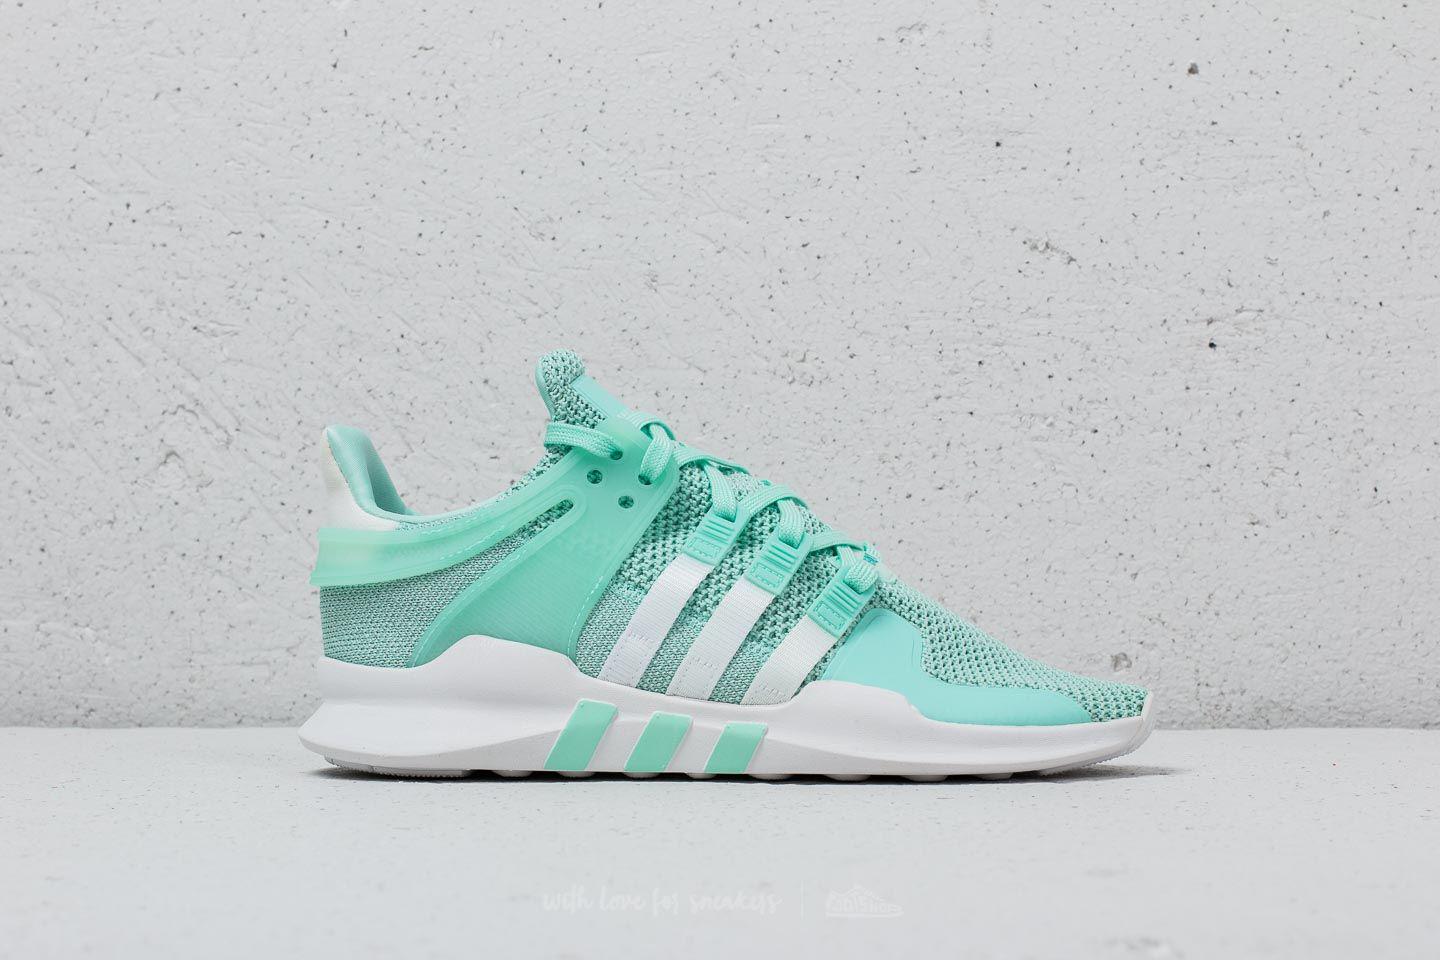 Adidas Eqt Support Adv Sneaker In Teal Green Save 45 Lyst - adidas tracksuit pants roblox adidas equipment support adv